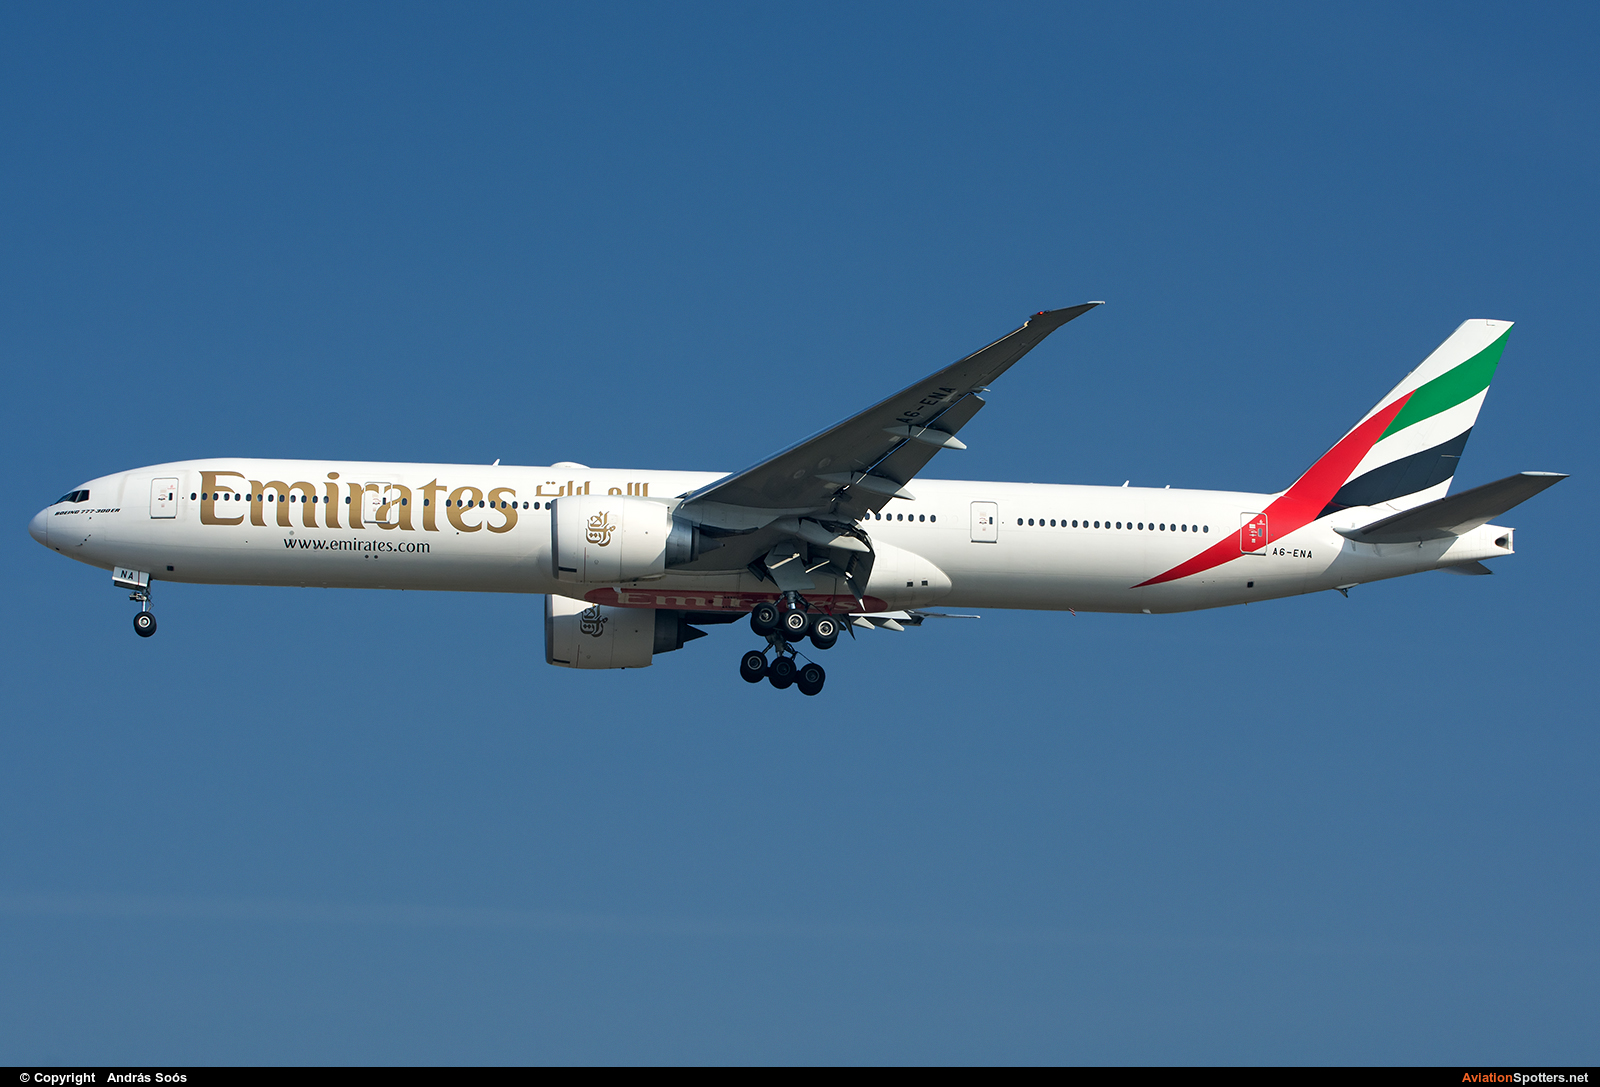 Emirates Airlines  -  777-300ER  (A6-ENA) By András Soós (sas1965)